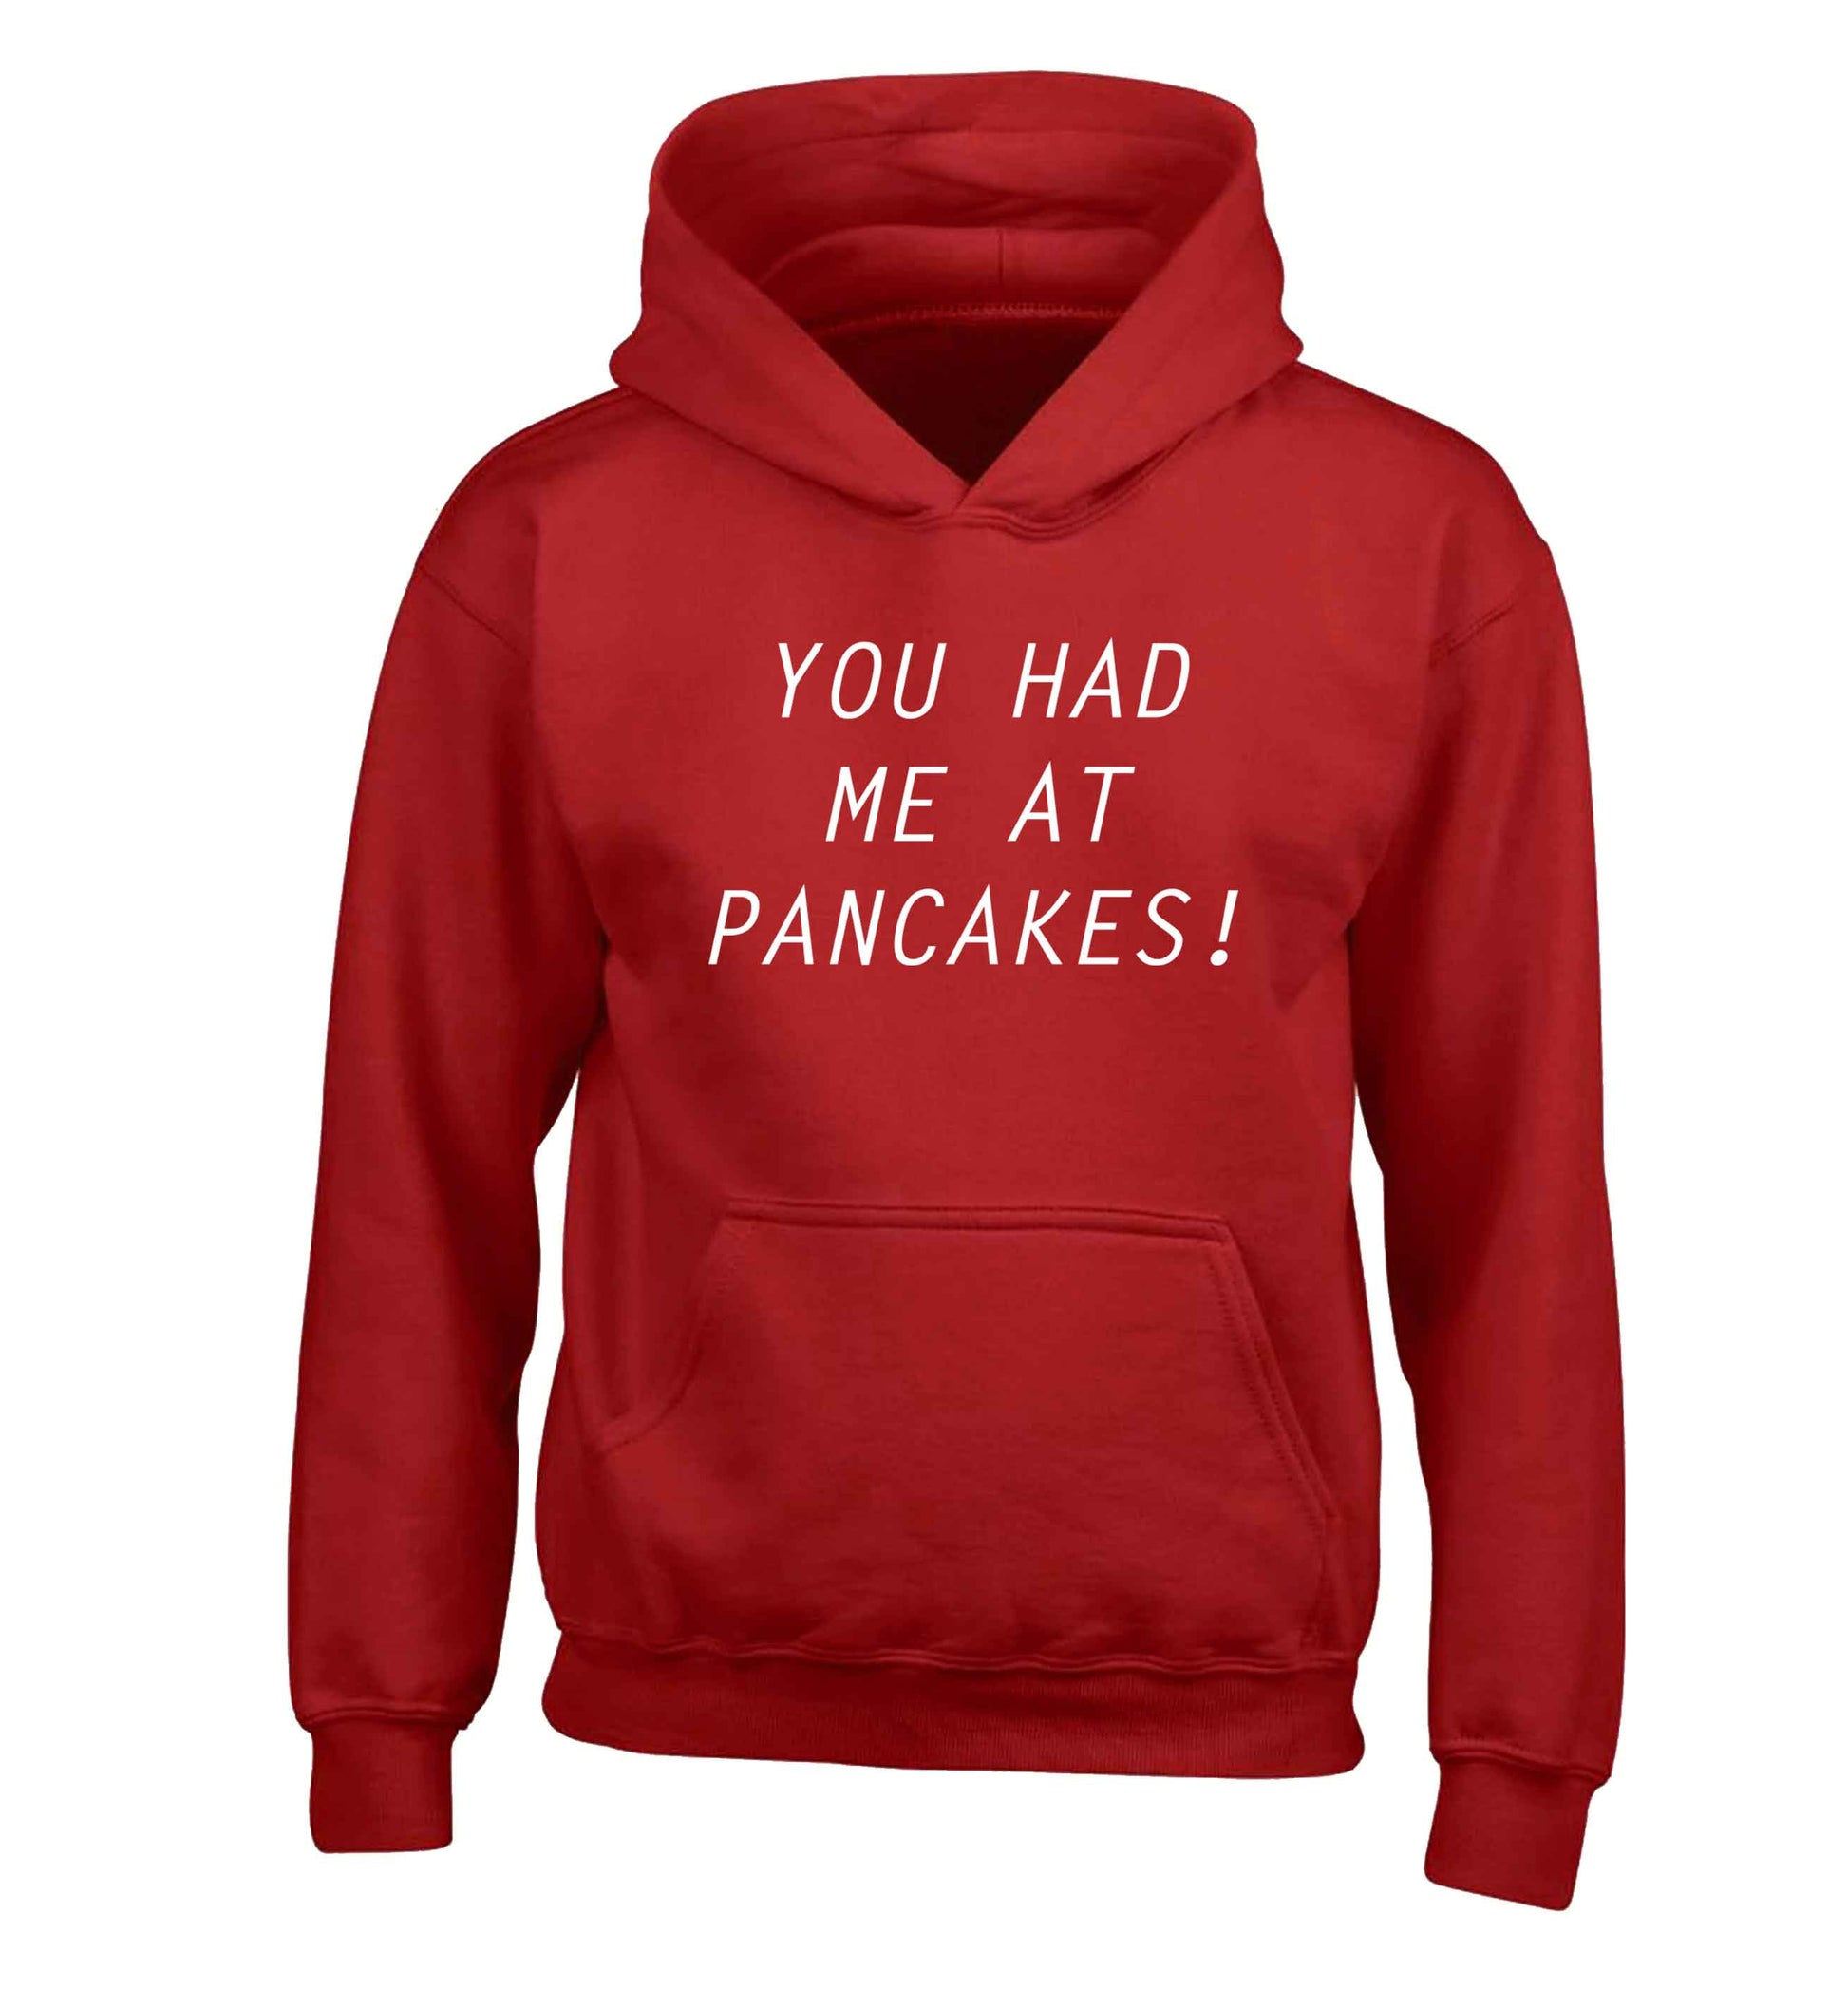 You had me at pancakes children's red hoodie 12-13 Years